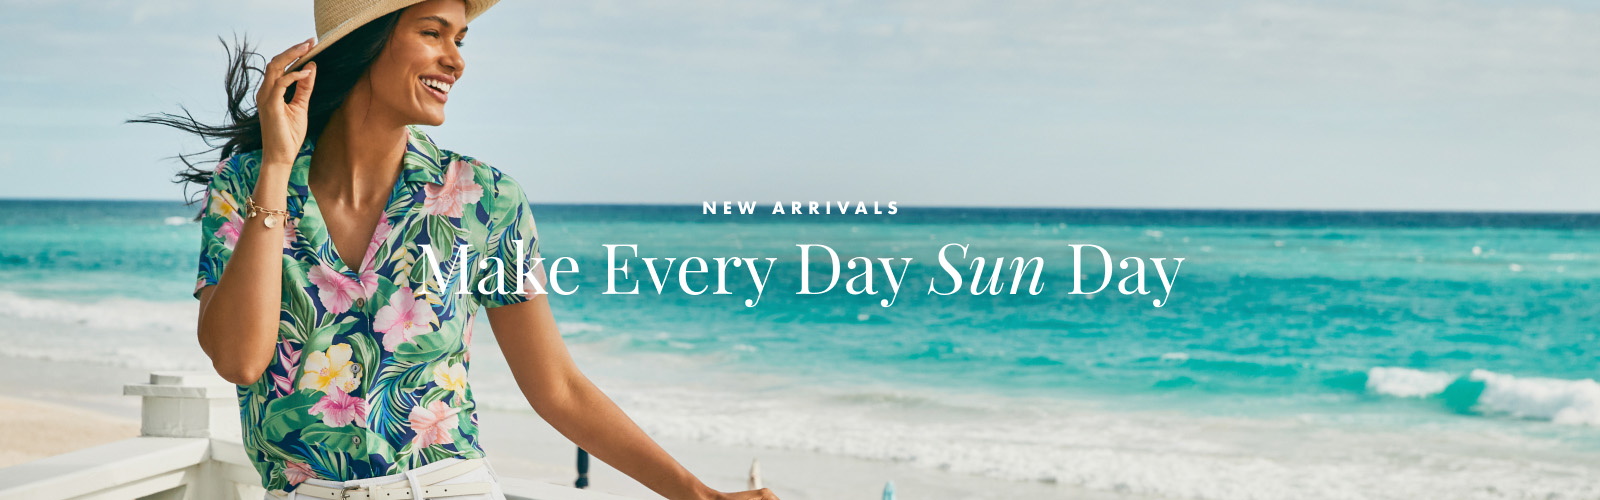 New Arrivals - Make Every Day Sun Day